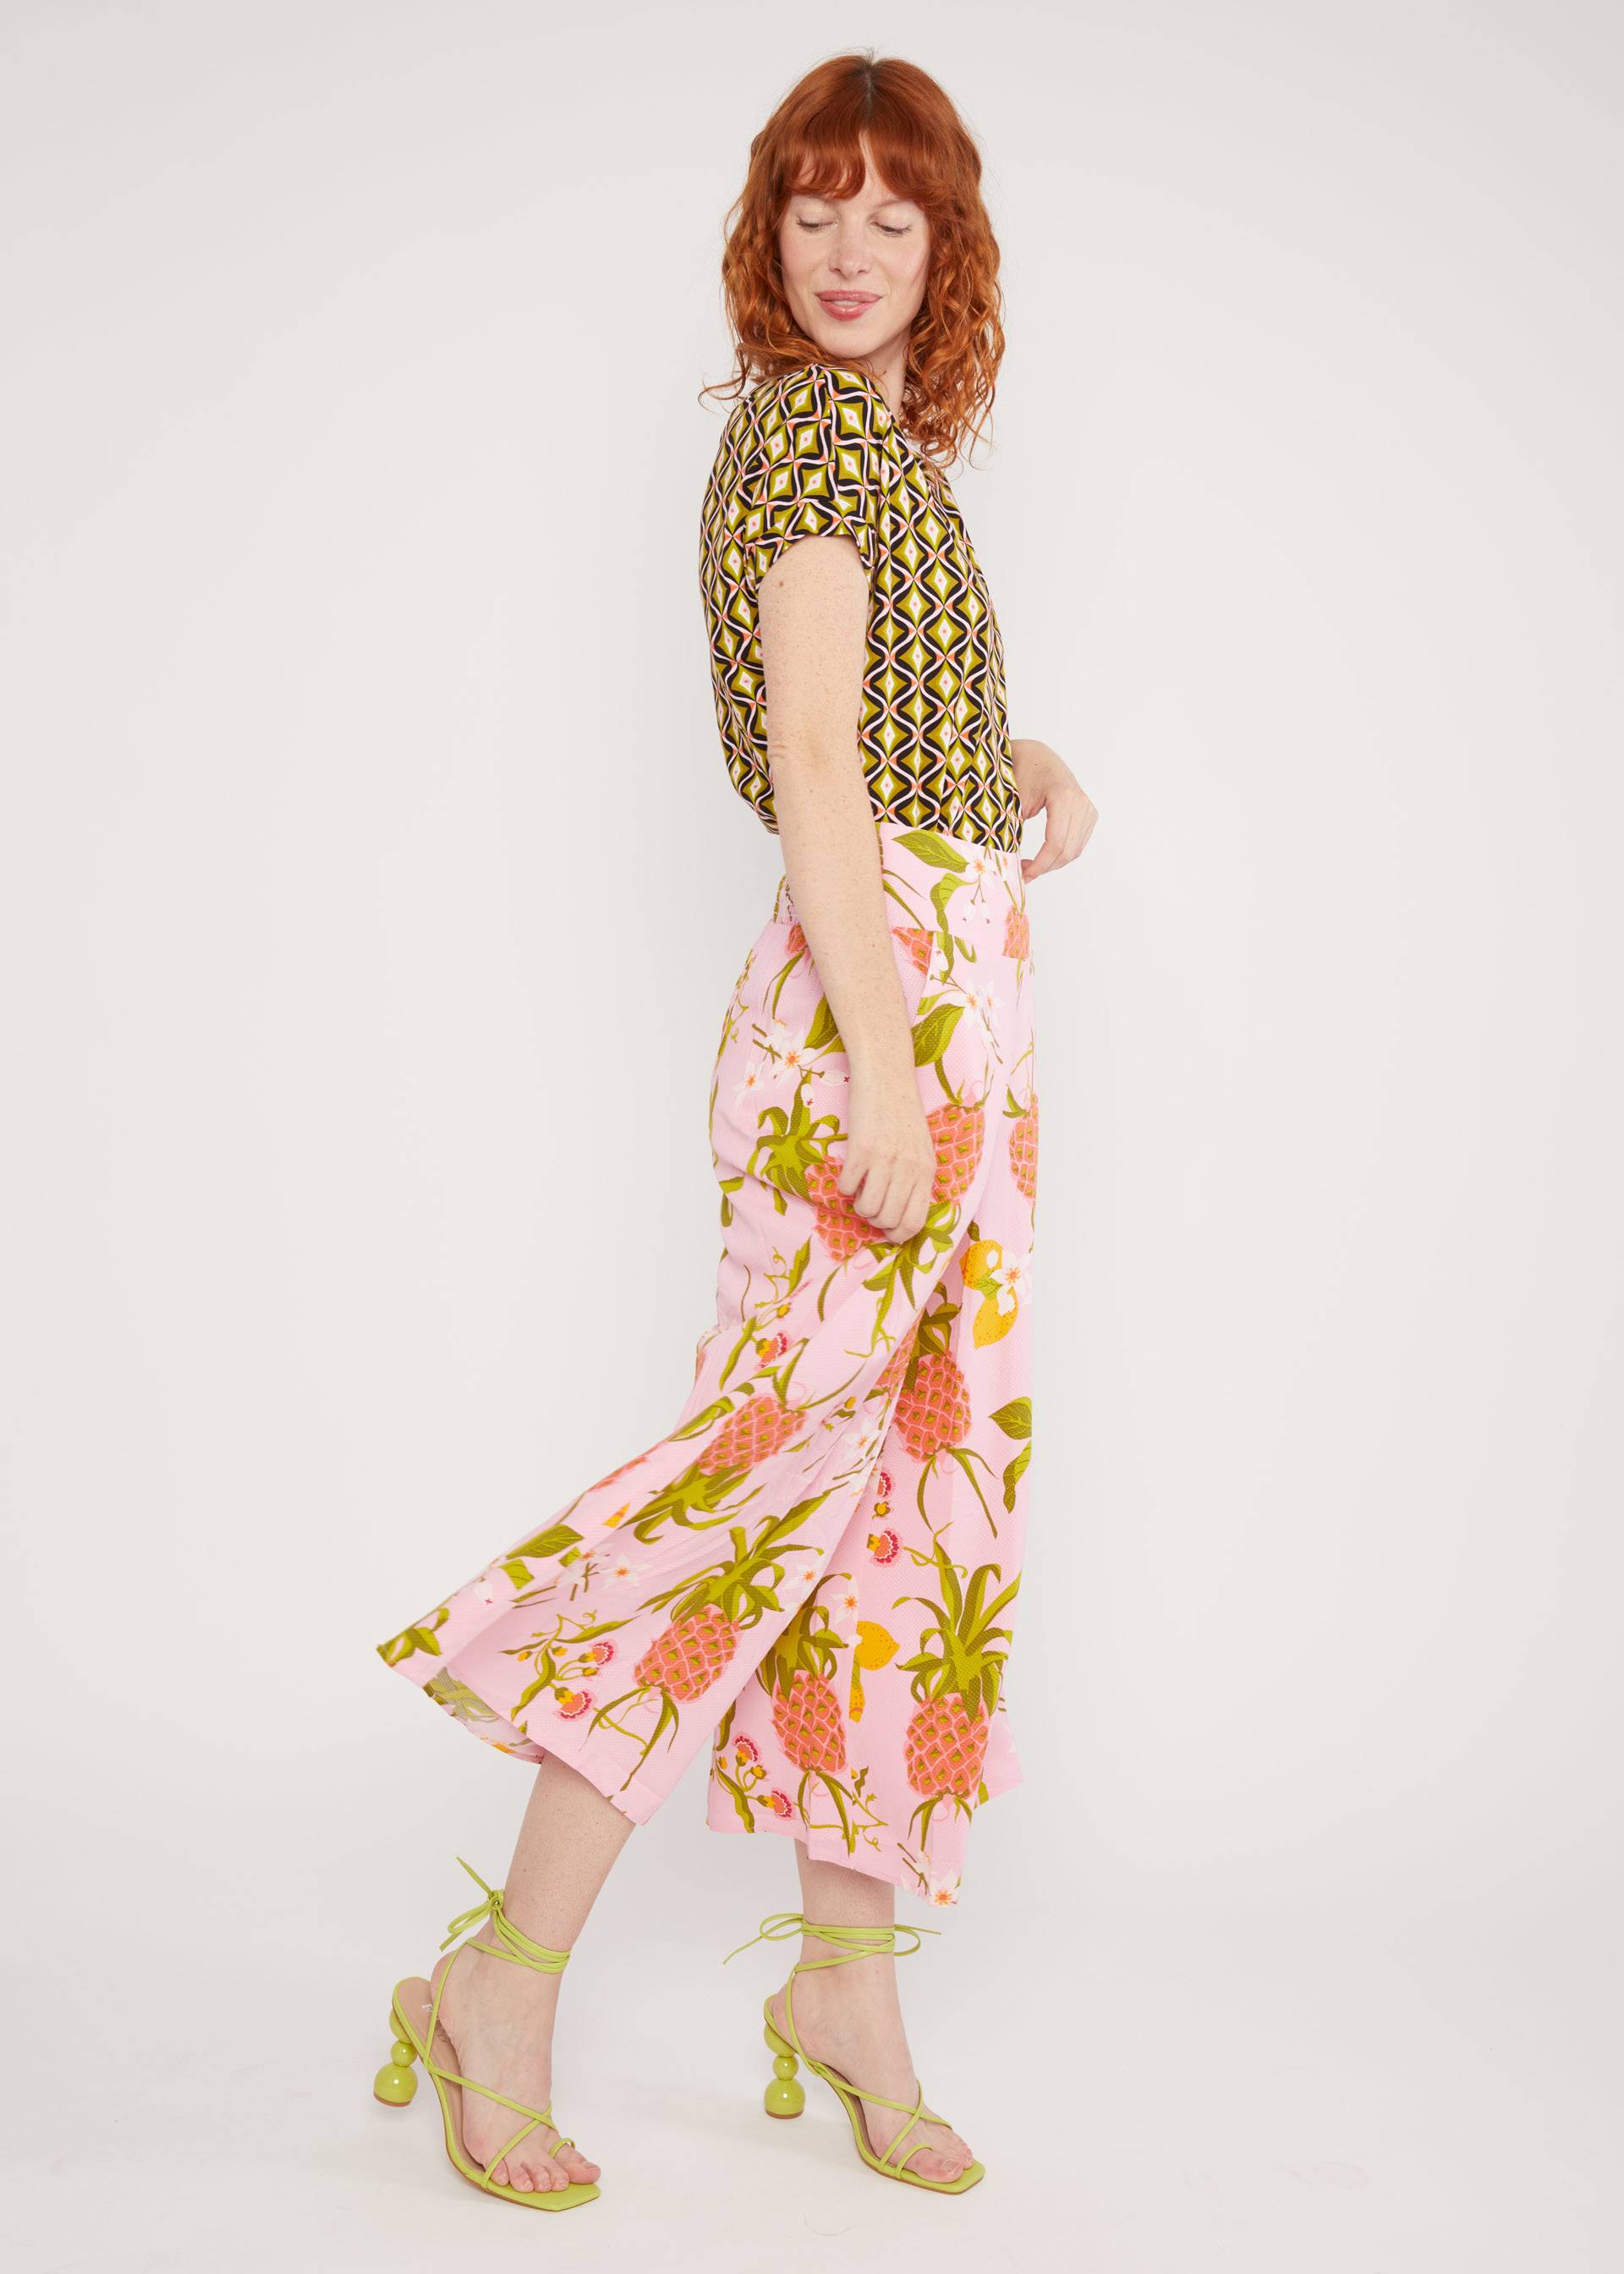 Culottes In Full Bloom, dancing fruits, Trousers, Pink